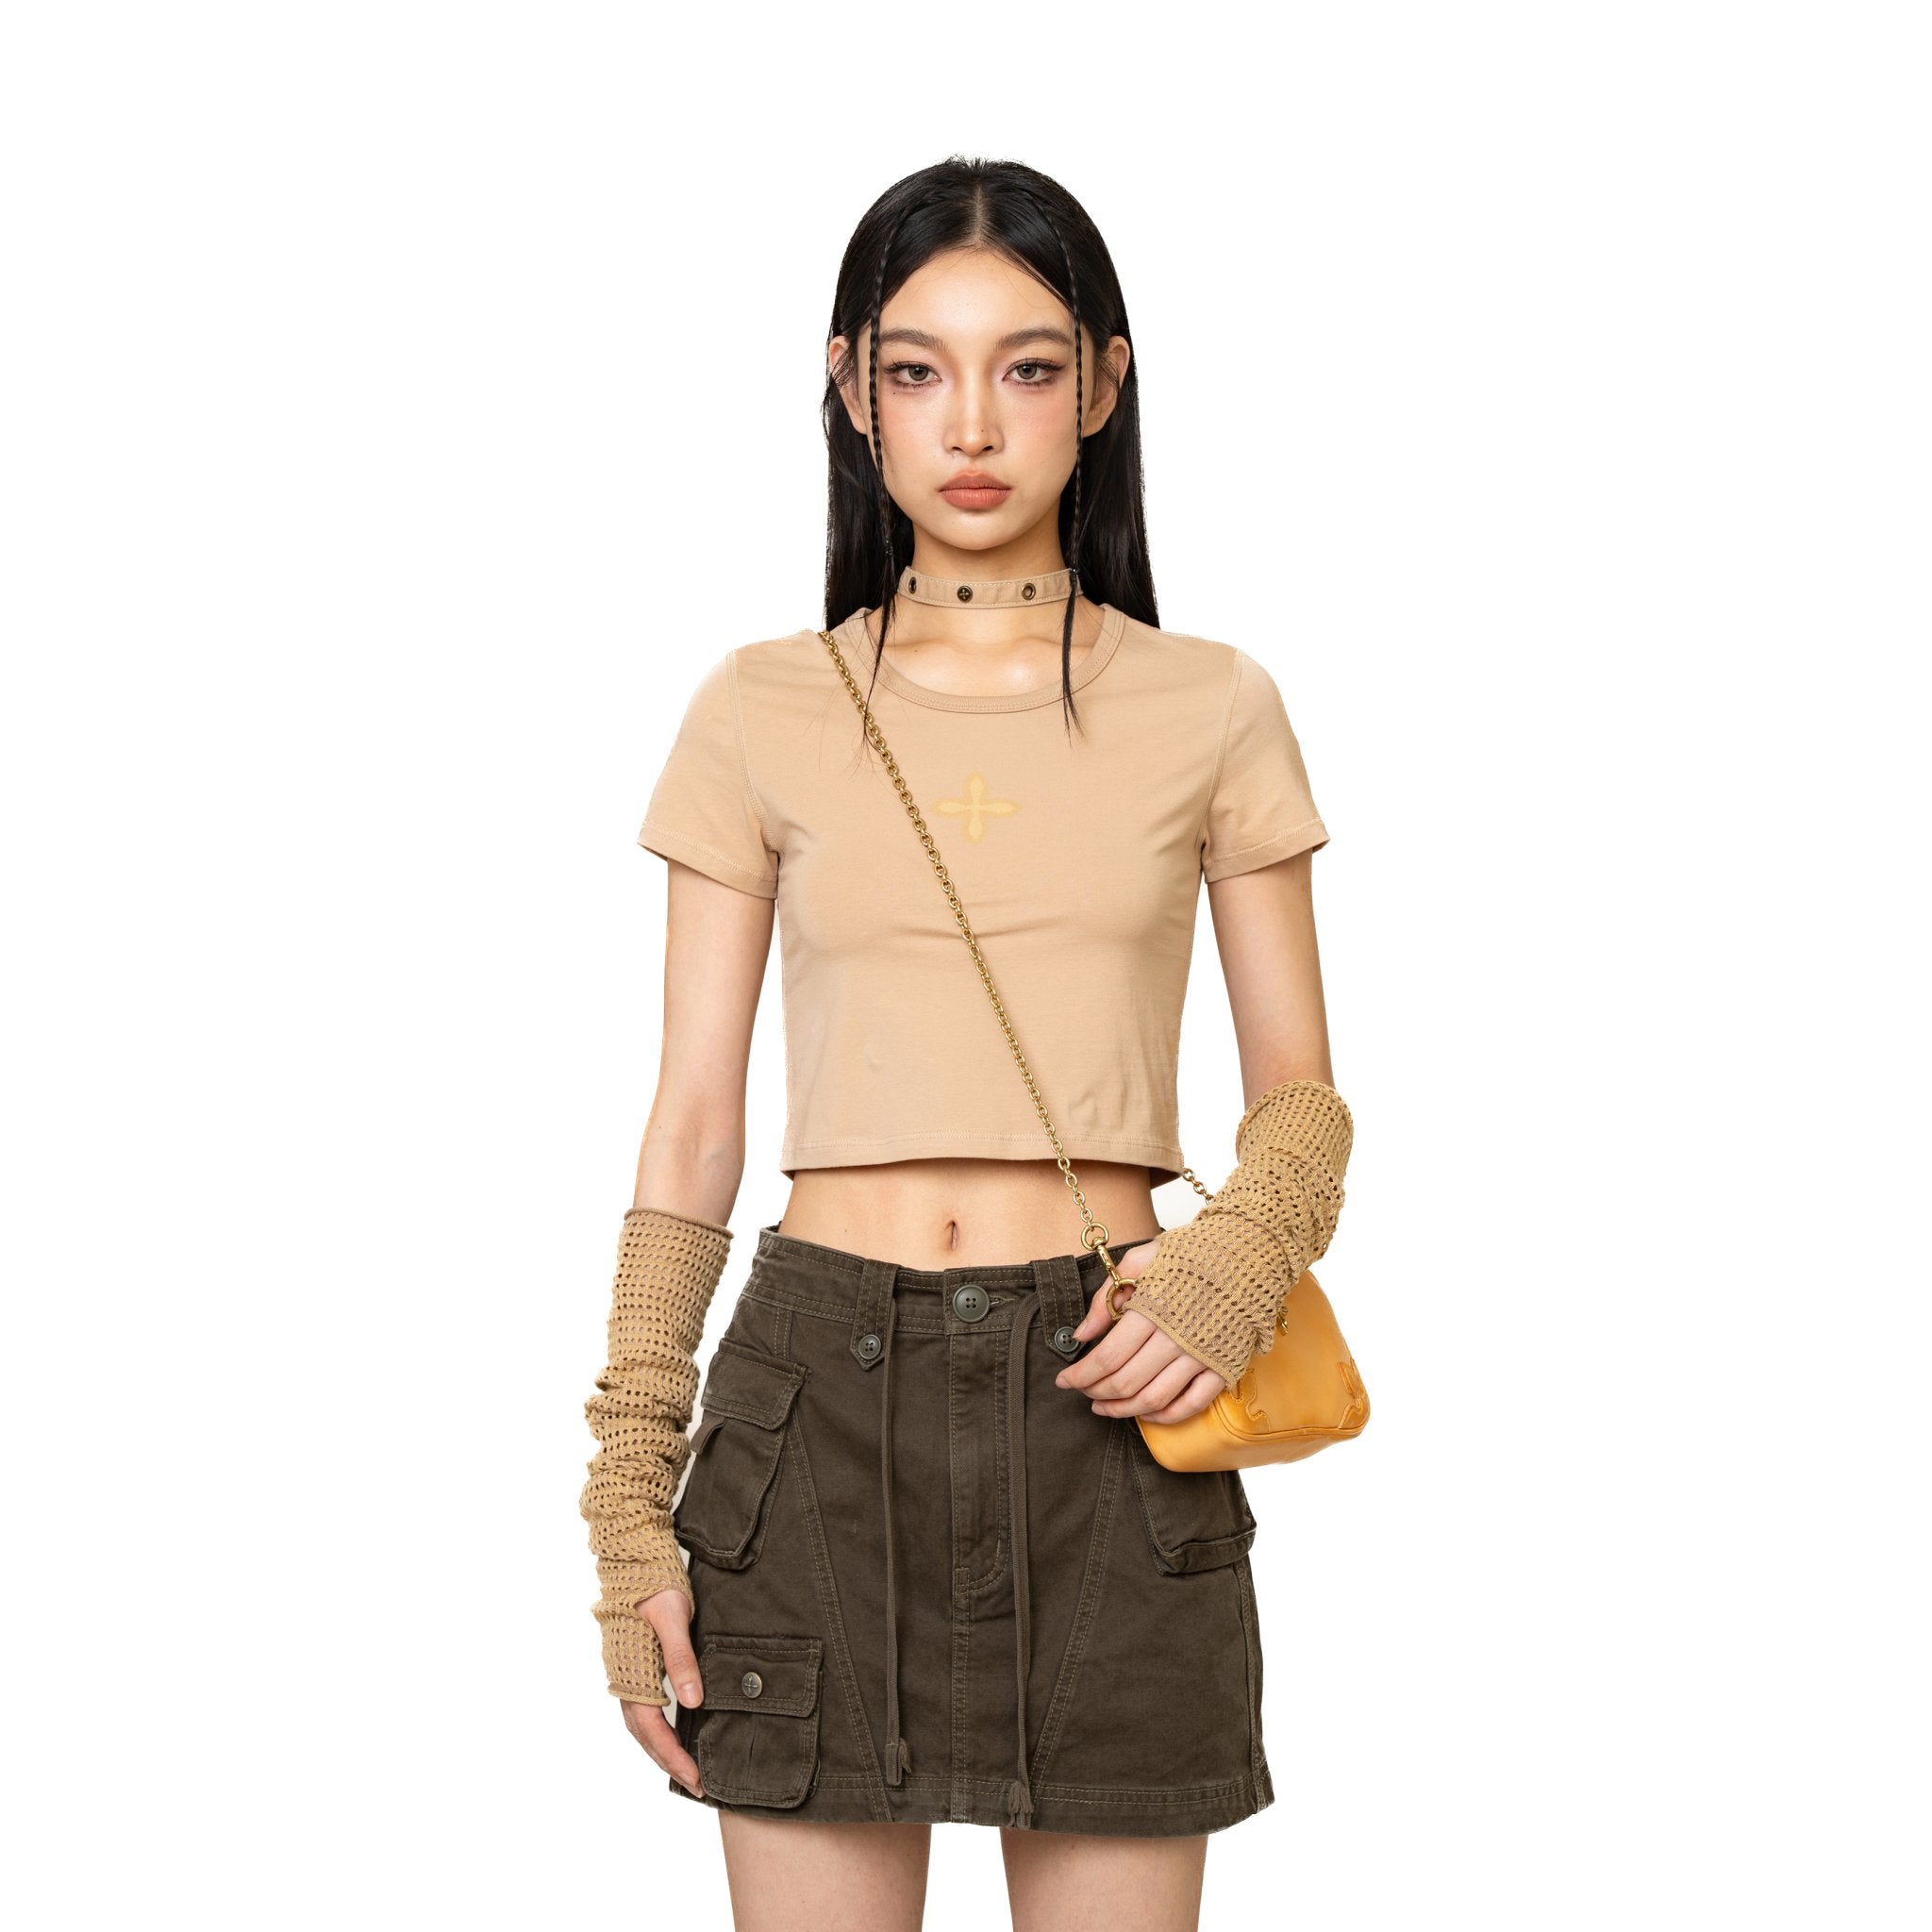 SMFK Compass Cross Sport Tights Tee In Wheat | MADA IN CHINA